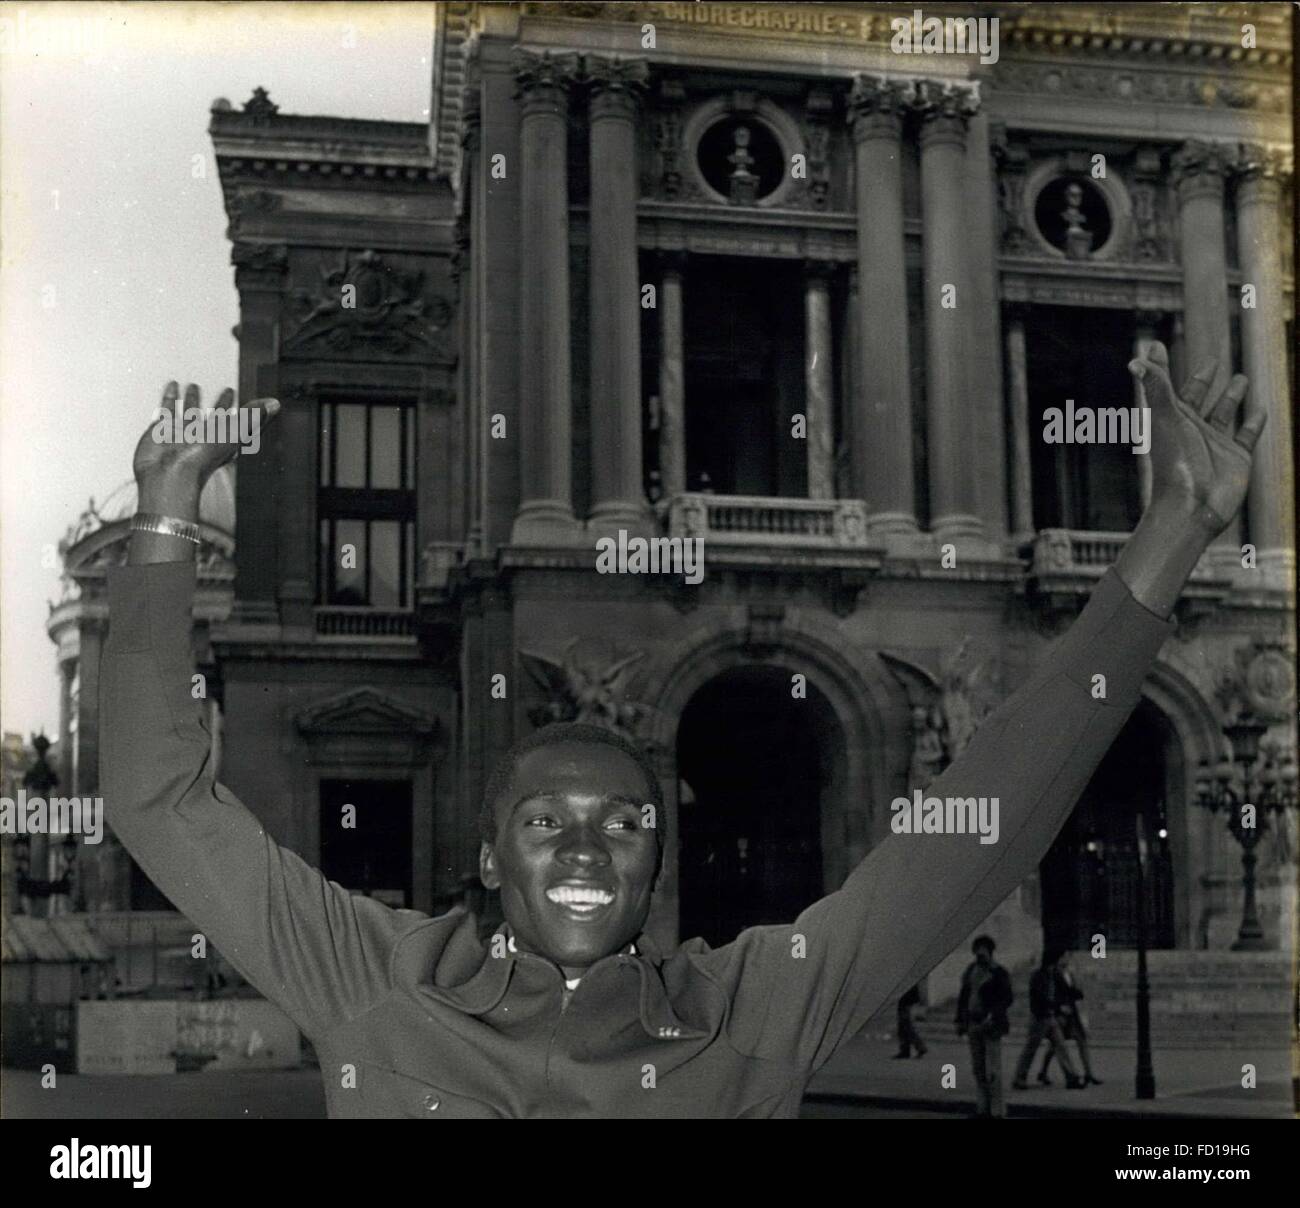 1968 - Hello, Paris! Olympic Black Champion On Visit To French Capital: Akii Bua, The Black Athlete, Olympic Gold Medal And Holder Of World's 400 M. Hurdles Record Is Now In Paris As A Guest Of The African Weekly ''Jeune Afrique''. Photo shows Akii Bua Pictured Before The Paris Opera House And During His Press Conference. © Keystone Pictures USA/ZUMAPRESS.com/Alamy Live News Stock Photo